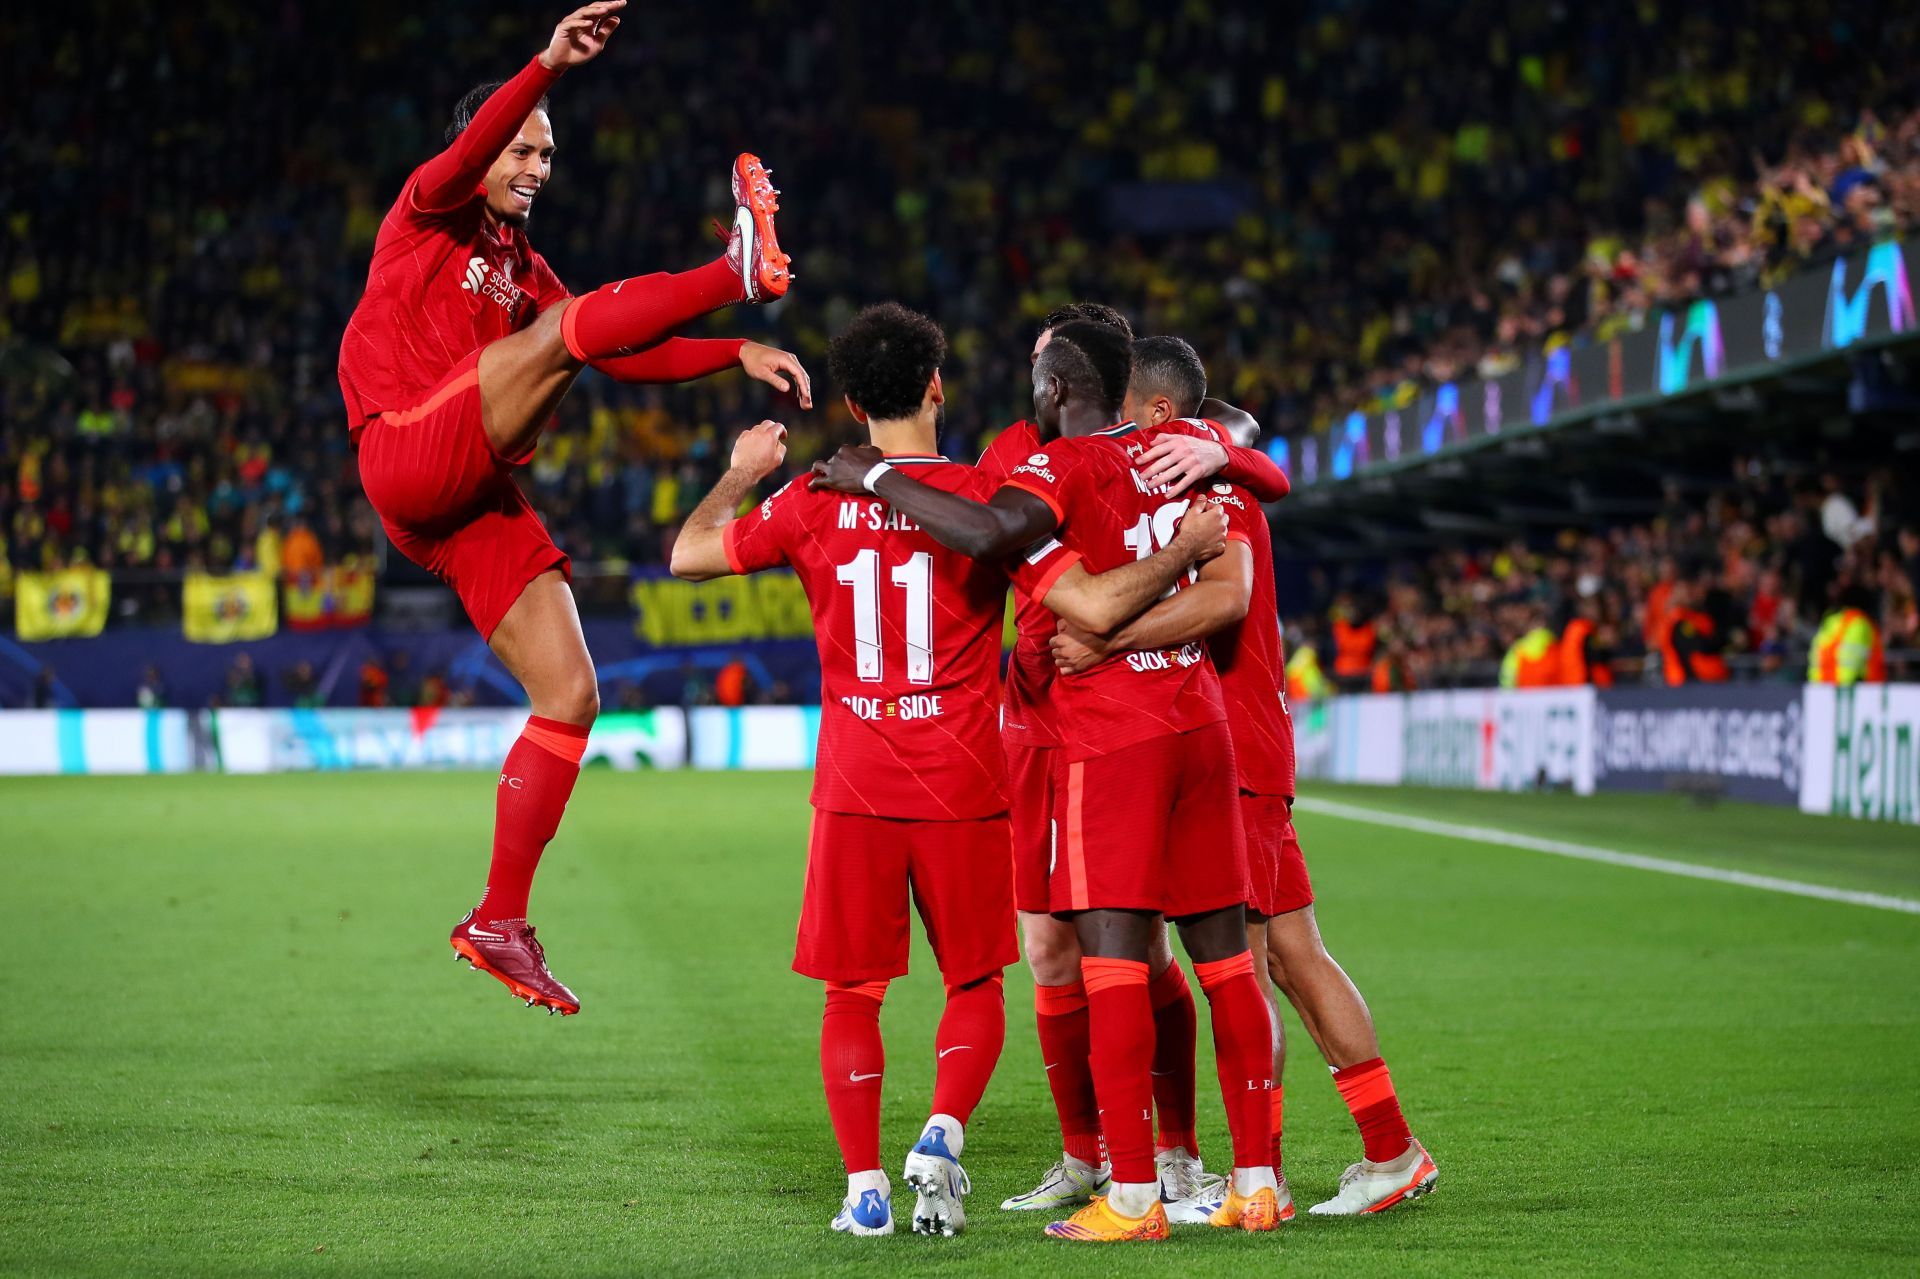 The Reds were just too strong for Villarreal in the end